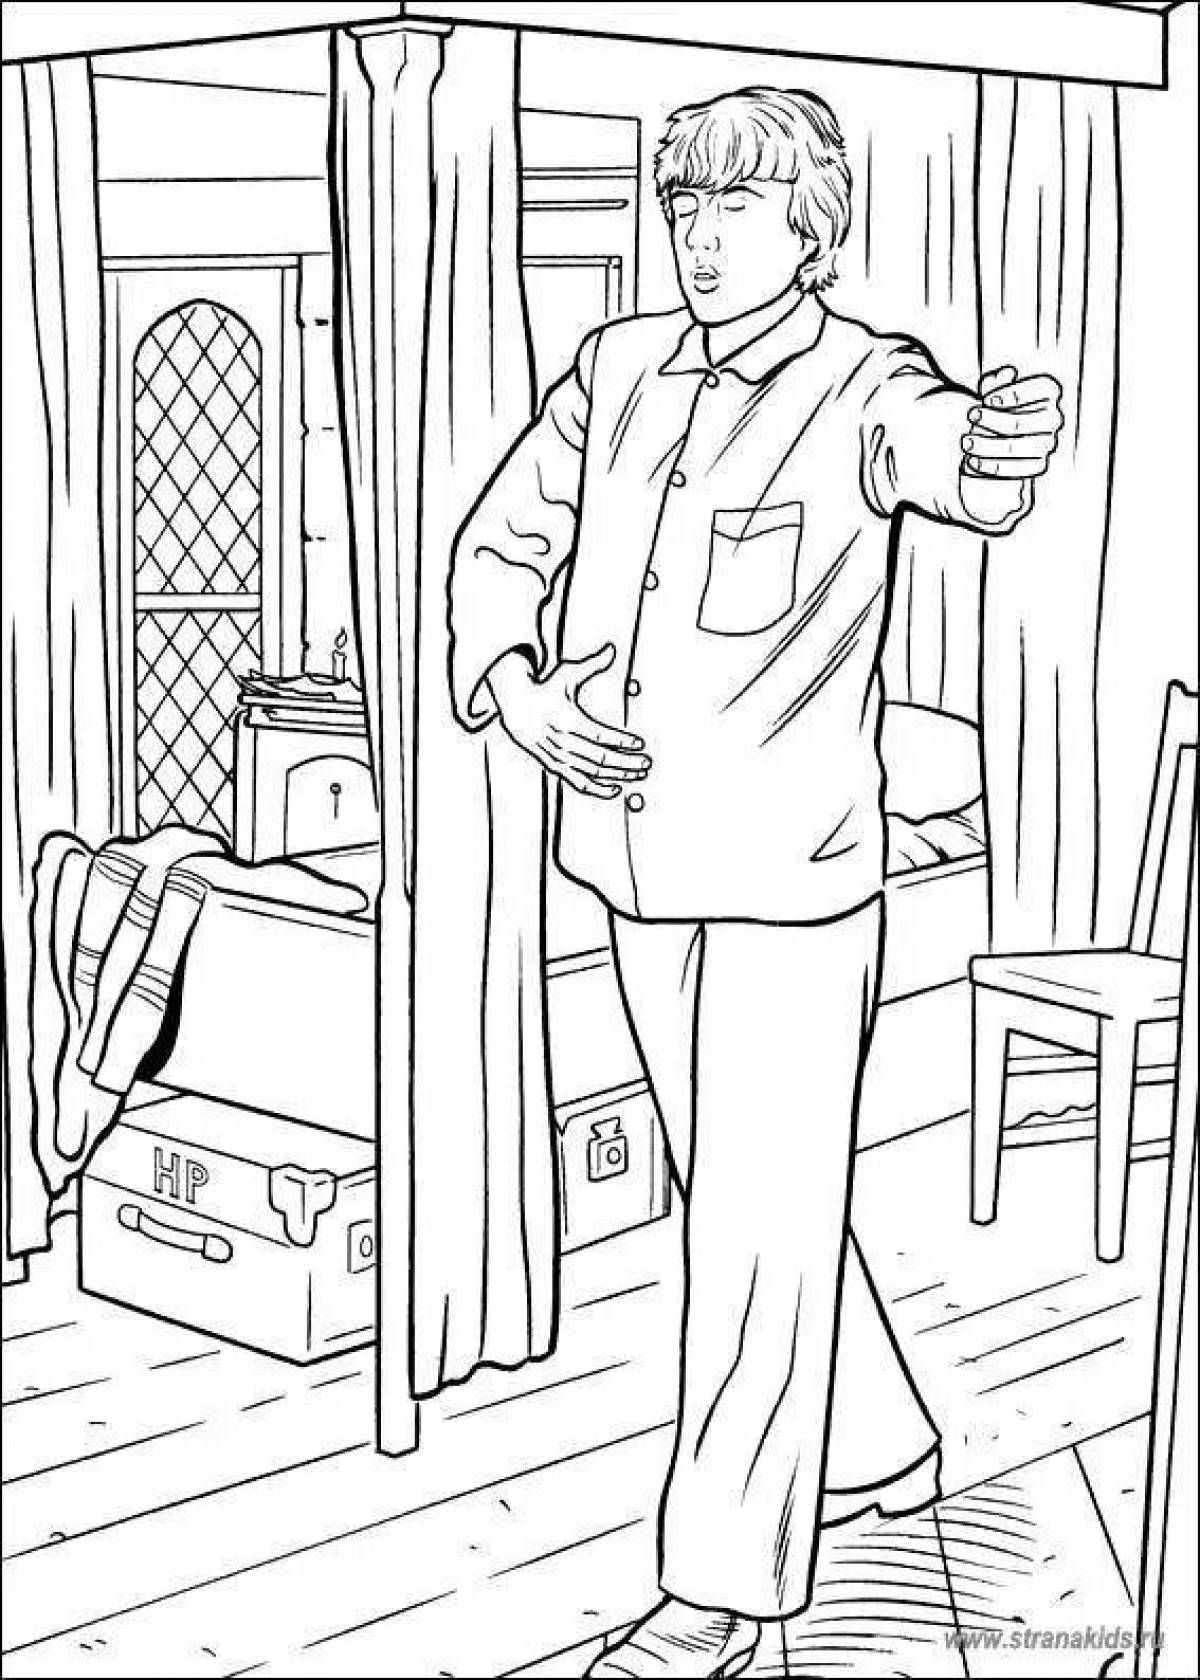 Ron Weasley's amazing coloring book